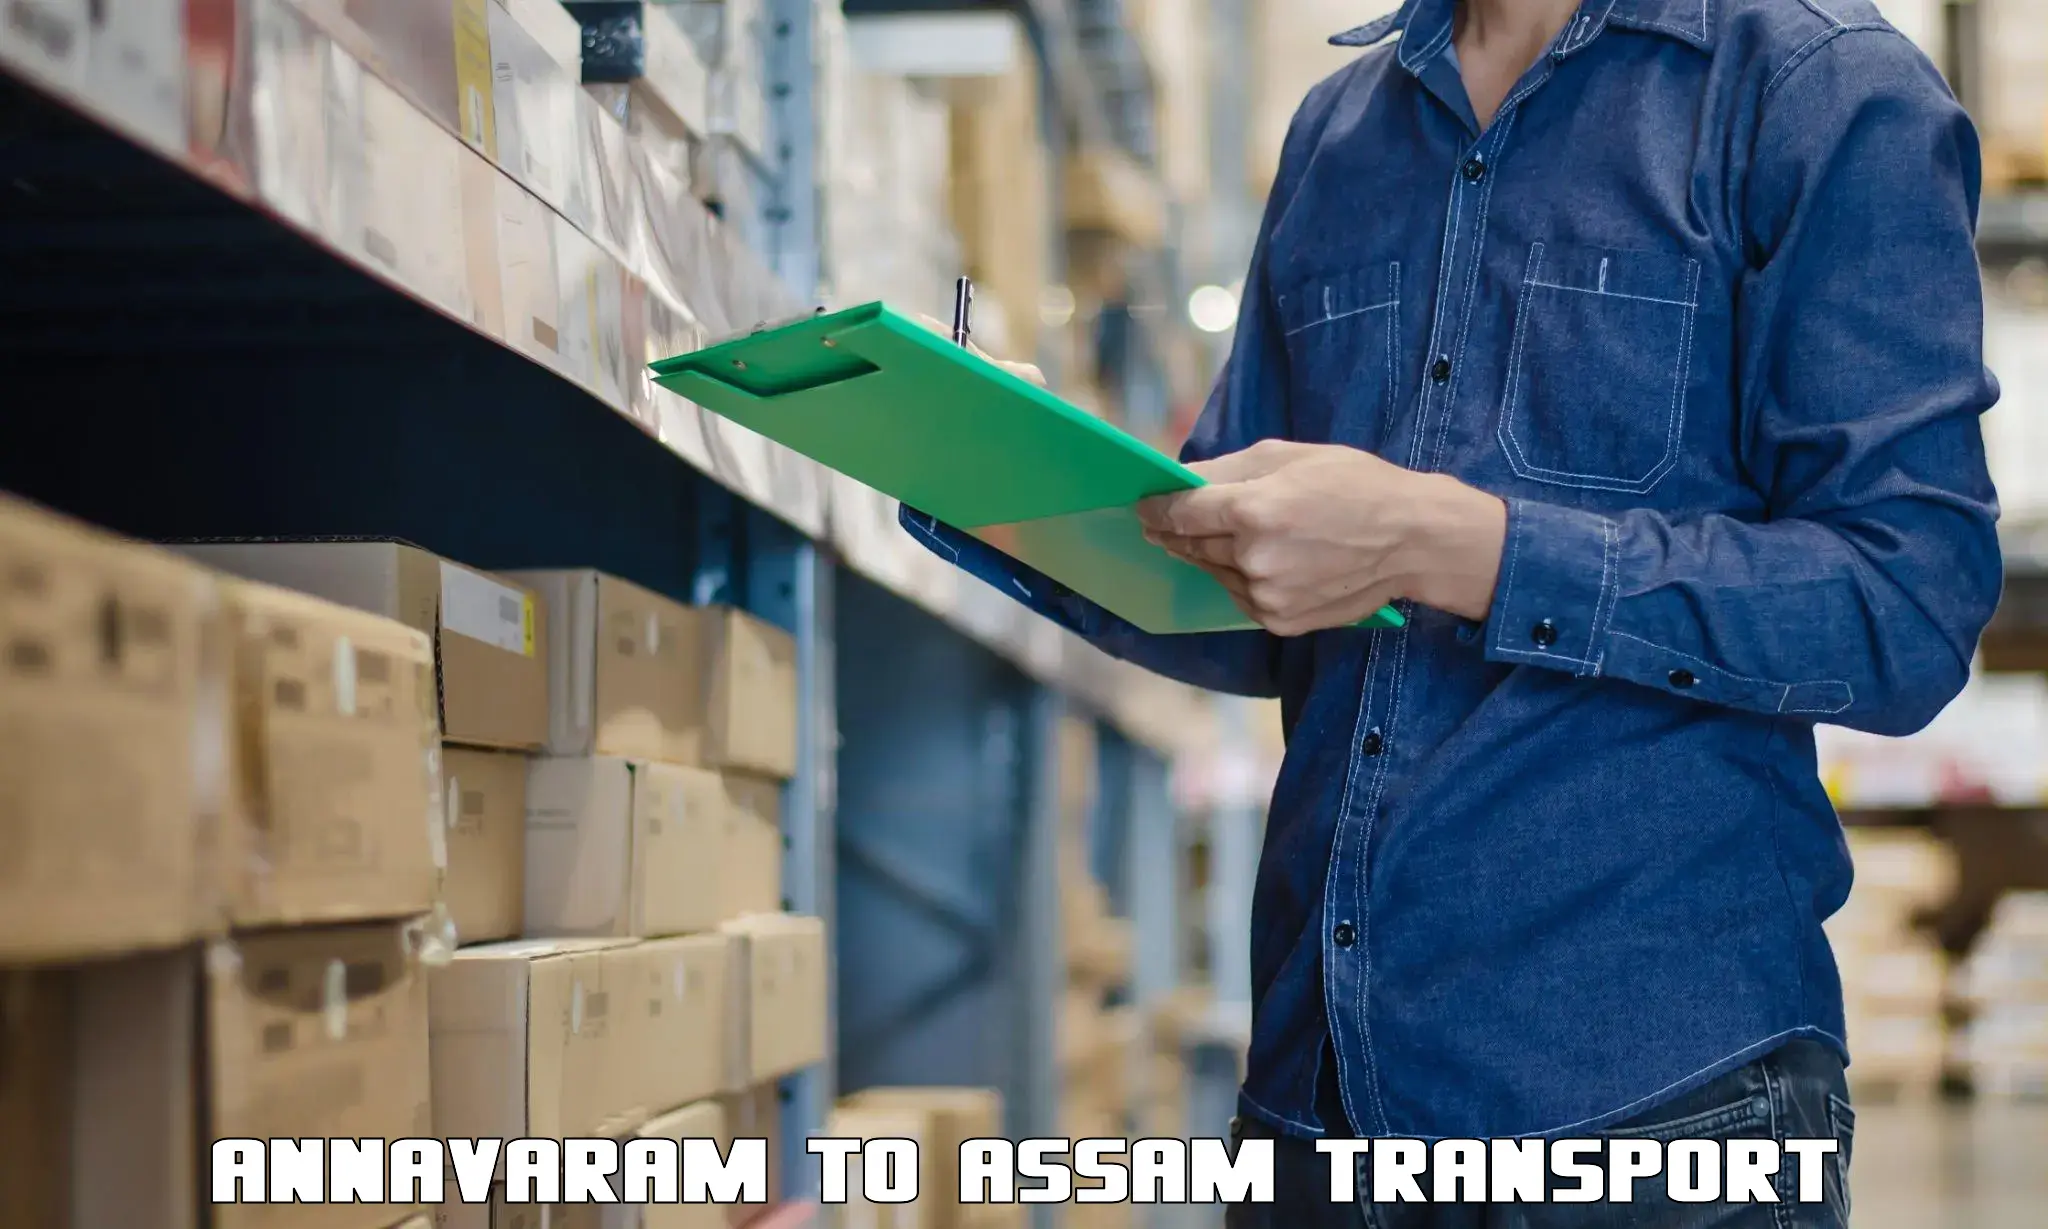 Goods delivery service Annavaram to Lala Assam